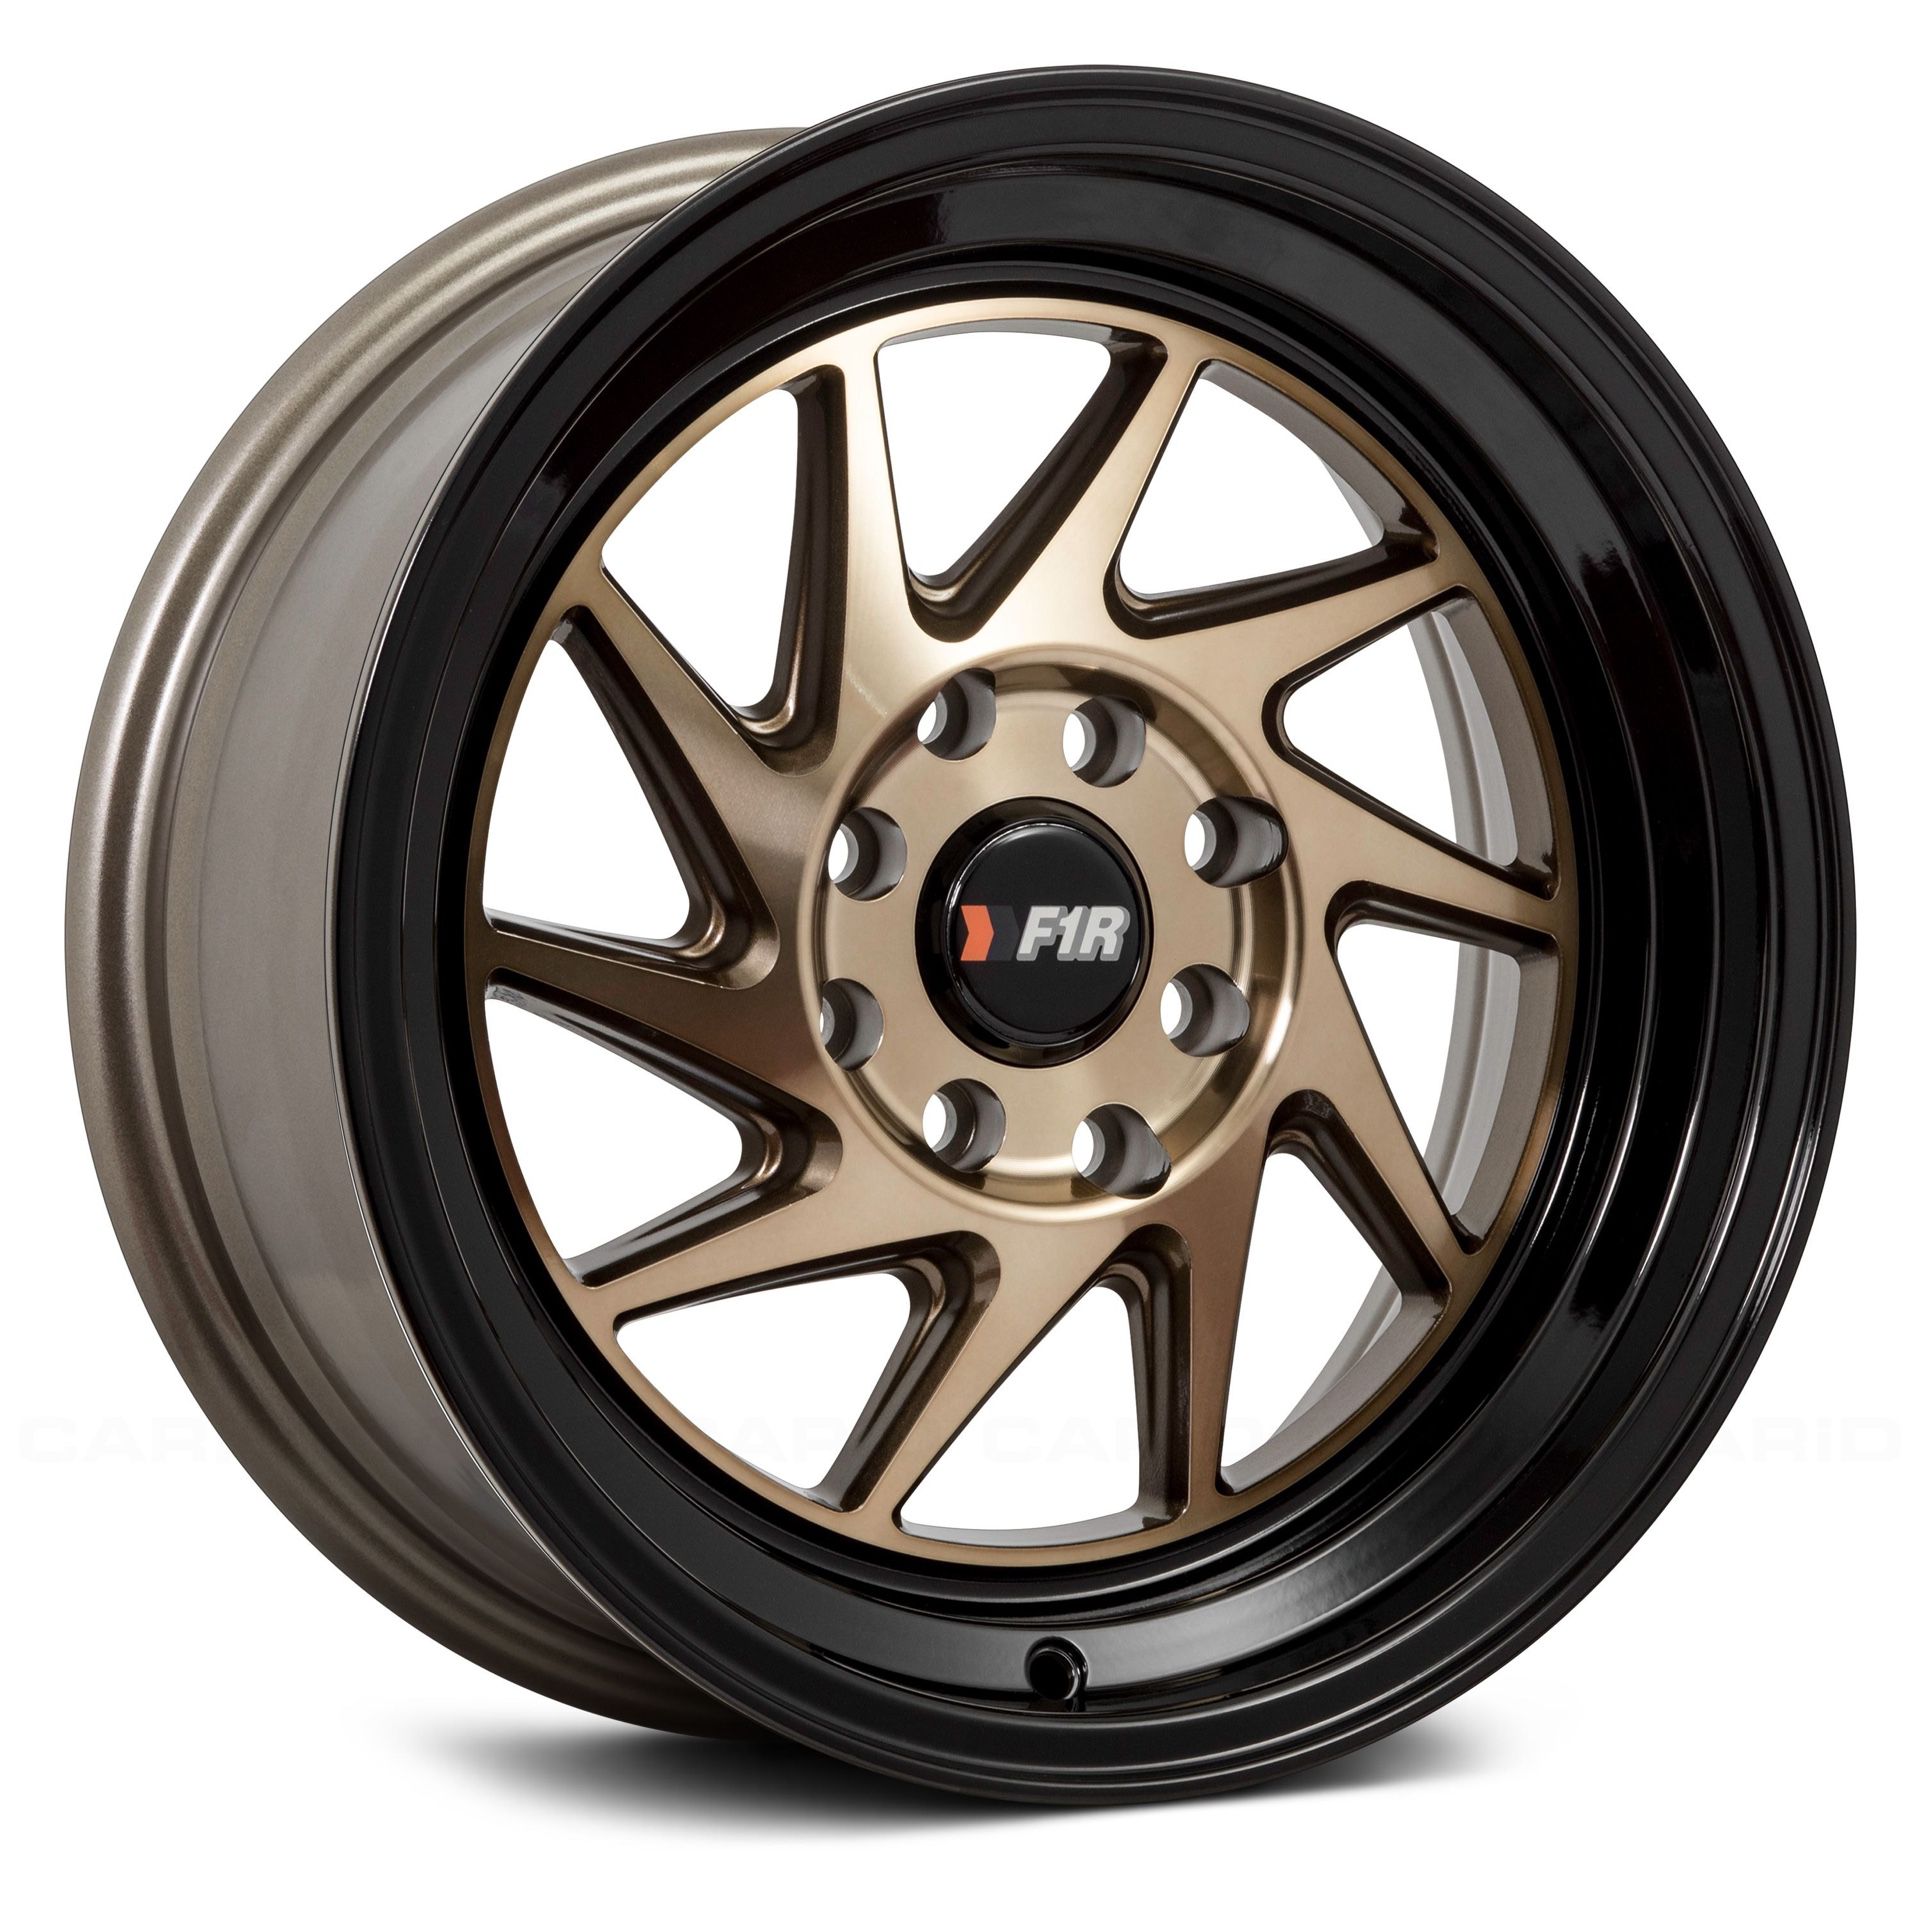 18” F1R Rims Get Approved for Finance Now ! NO CREDIT CHECK